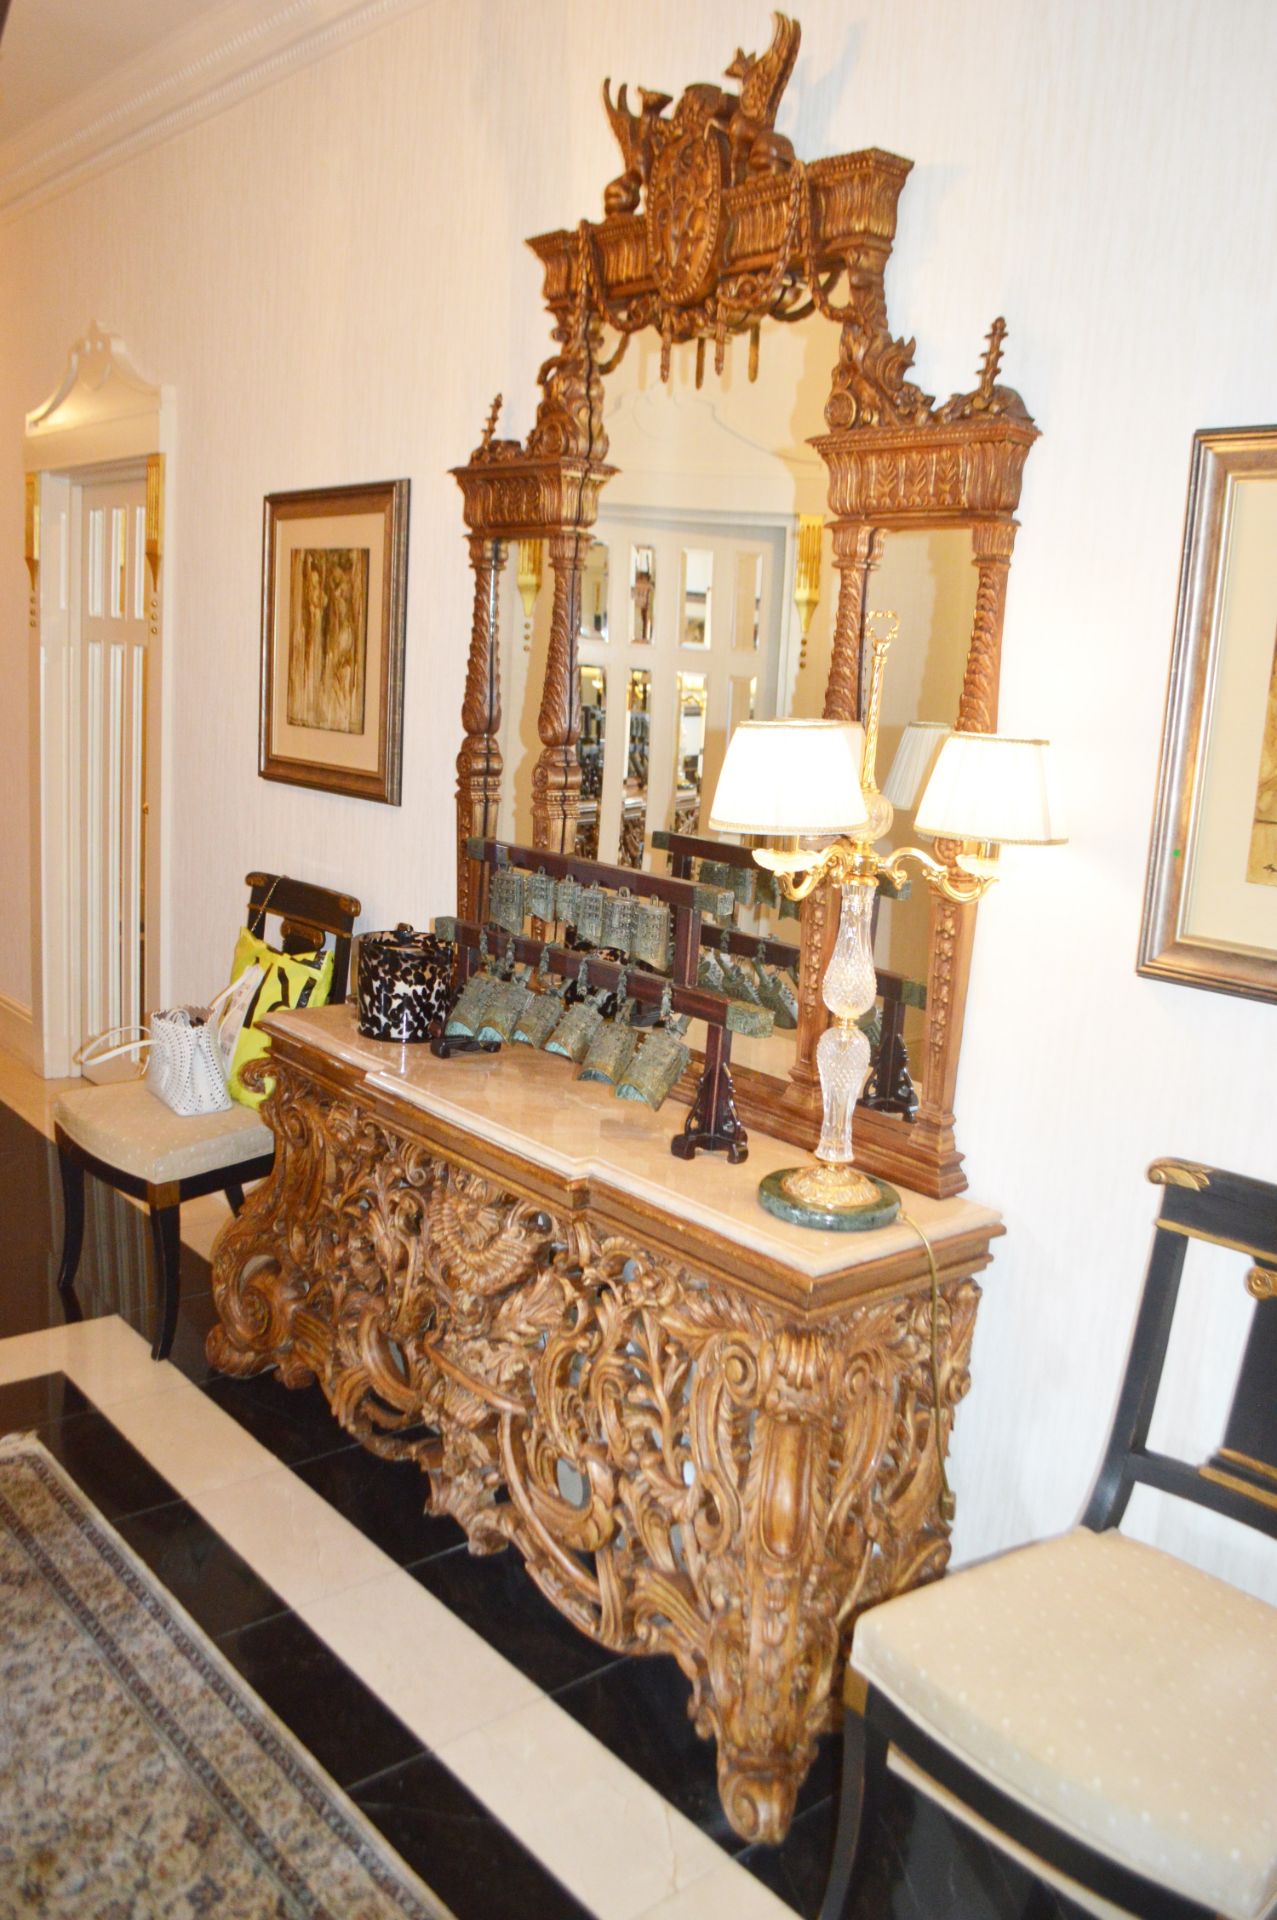 1 x Bespoke Ornate Hand-crafted Console Display Table With Matching Mirror - To Be Removed From An